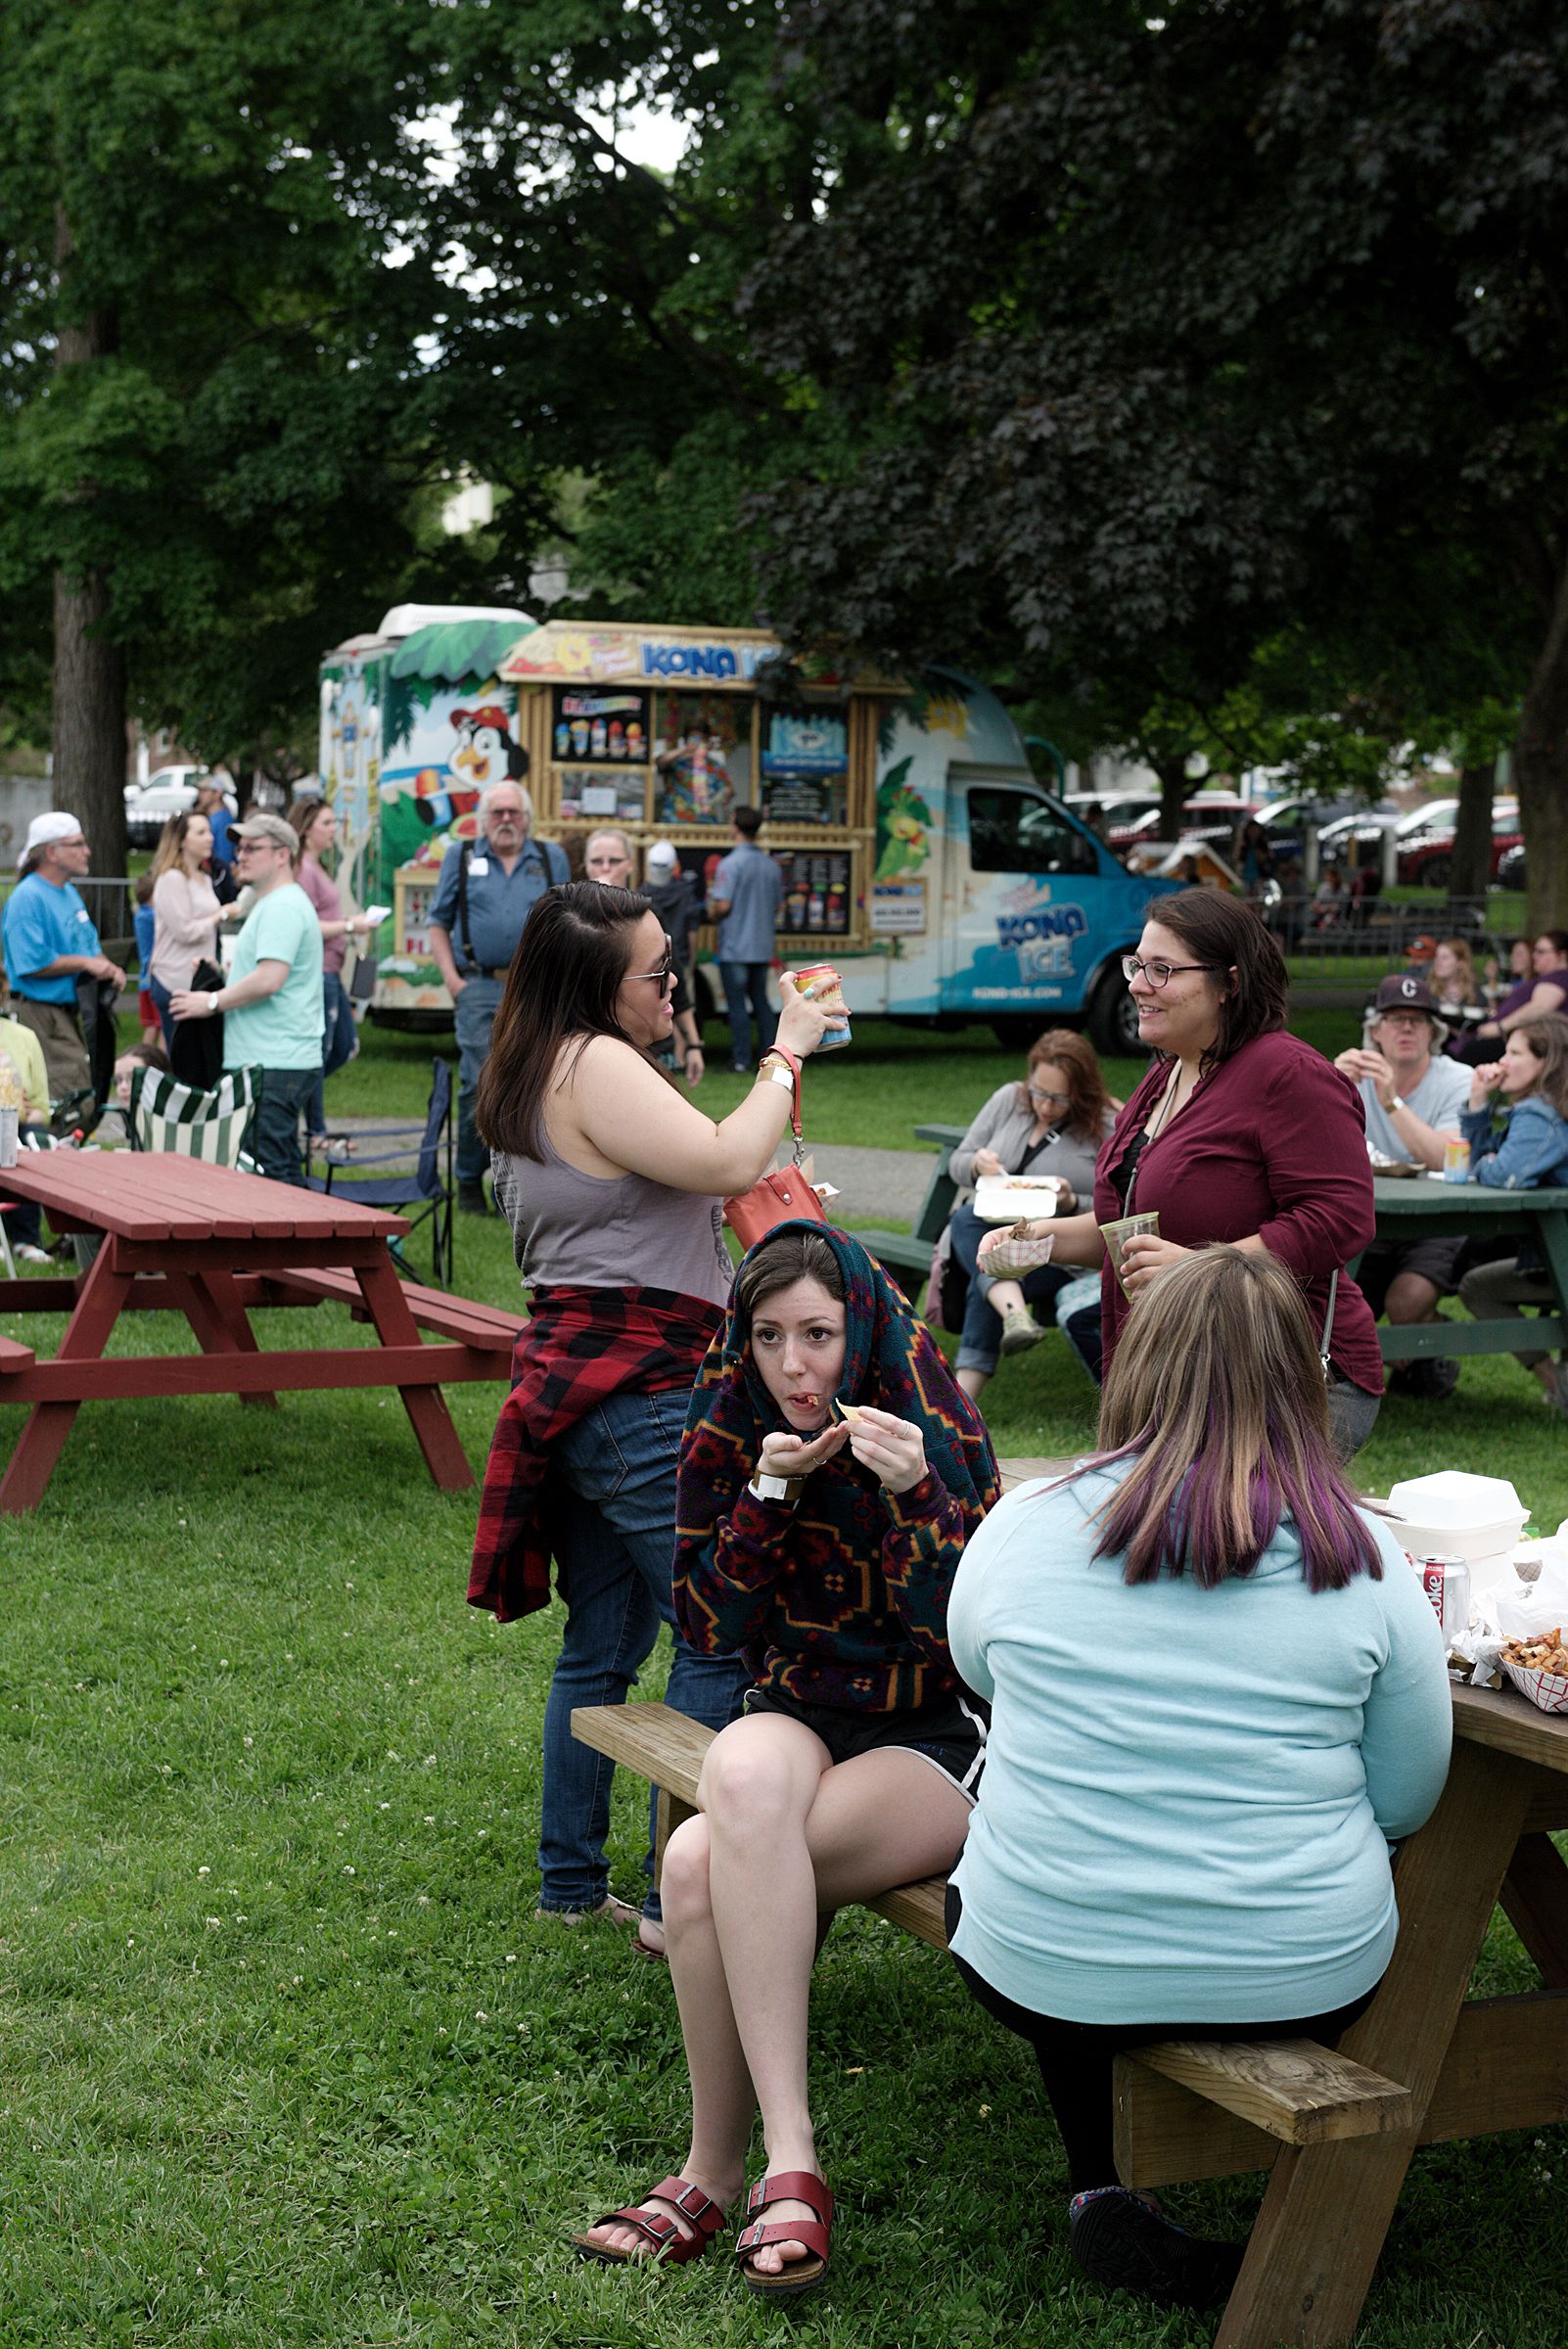 Colburn Park in Lebanon, N.H., filled with 13 mobile food vendors and hundreds of hungry patrons during the Lebanon Food Truck Festival on Friday, June 21, 2019. Funds raised from ticket sales benefit the city's park development. (Valley News - James M. Patterson) Copyright Valley News. May not be reprinted or used online without permission. Send requests to permission@vnews.com.